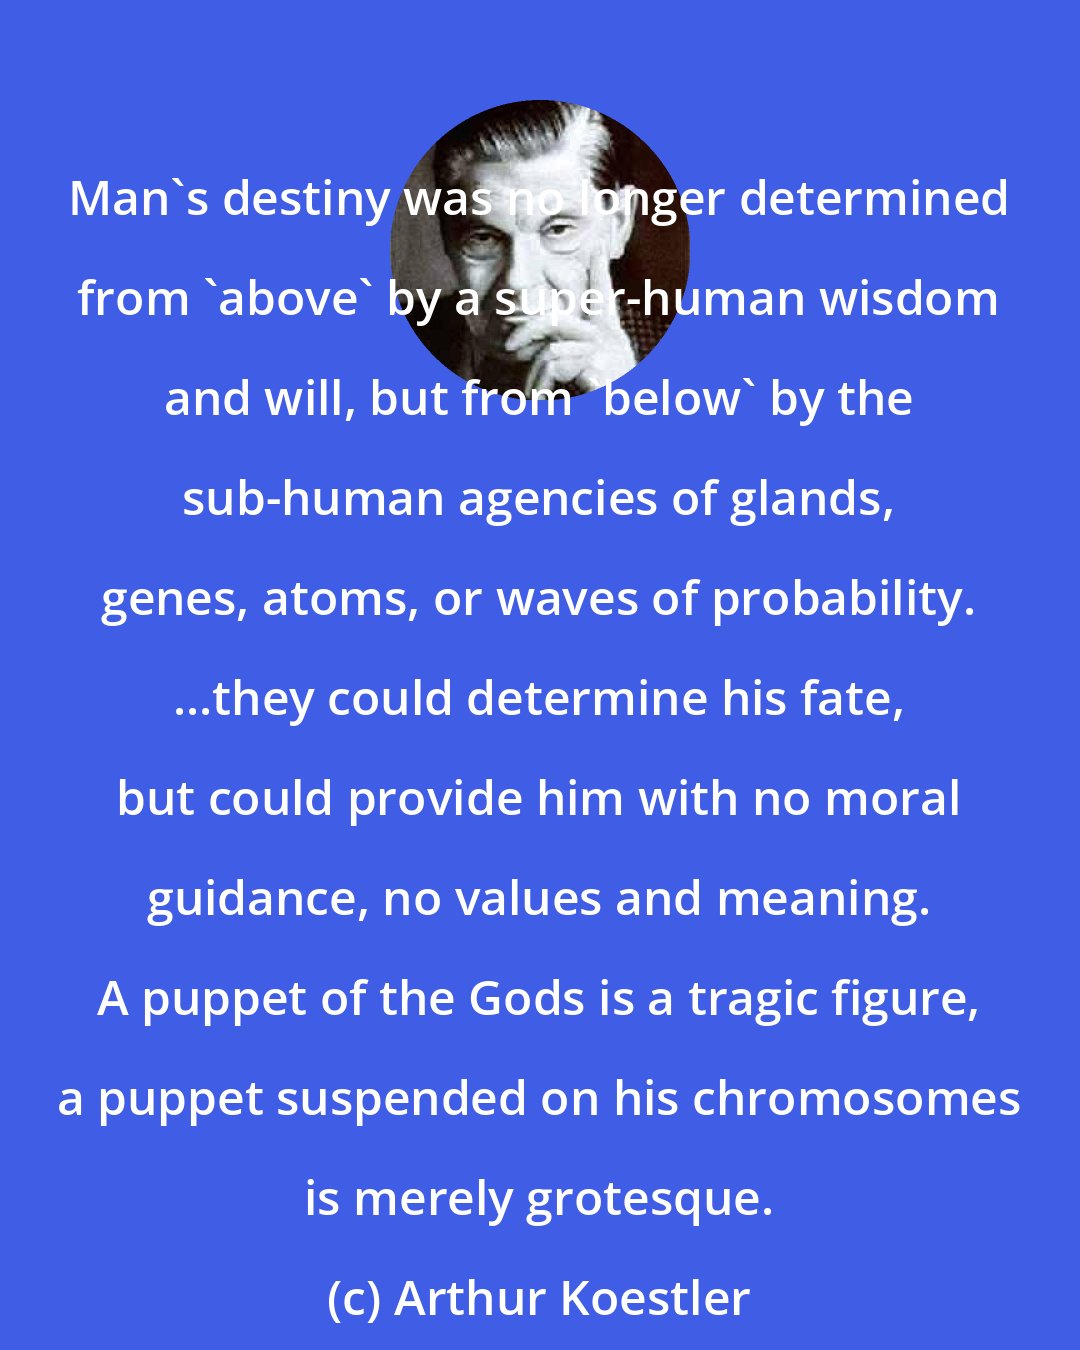 Arthur Koestler: Man's destiny was no longer determined from 'above' by a super-human wisdom and will, but from 'below' by the sub-human agencies of glands, genes, atoms, or waves of probability. ...they could determine his fate, but could provide him with no moral guidance, no values and meaning. A puppet of the Gods is a tragic figure, a puppet suspended on his chromosomes is merely grotesque.